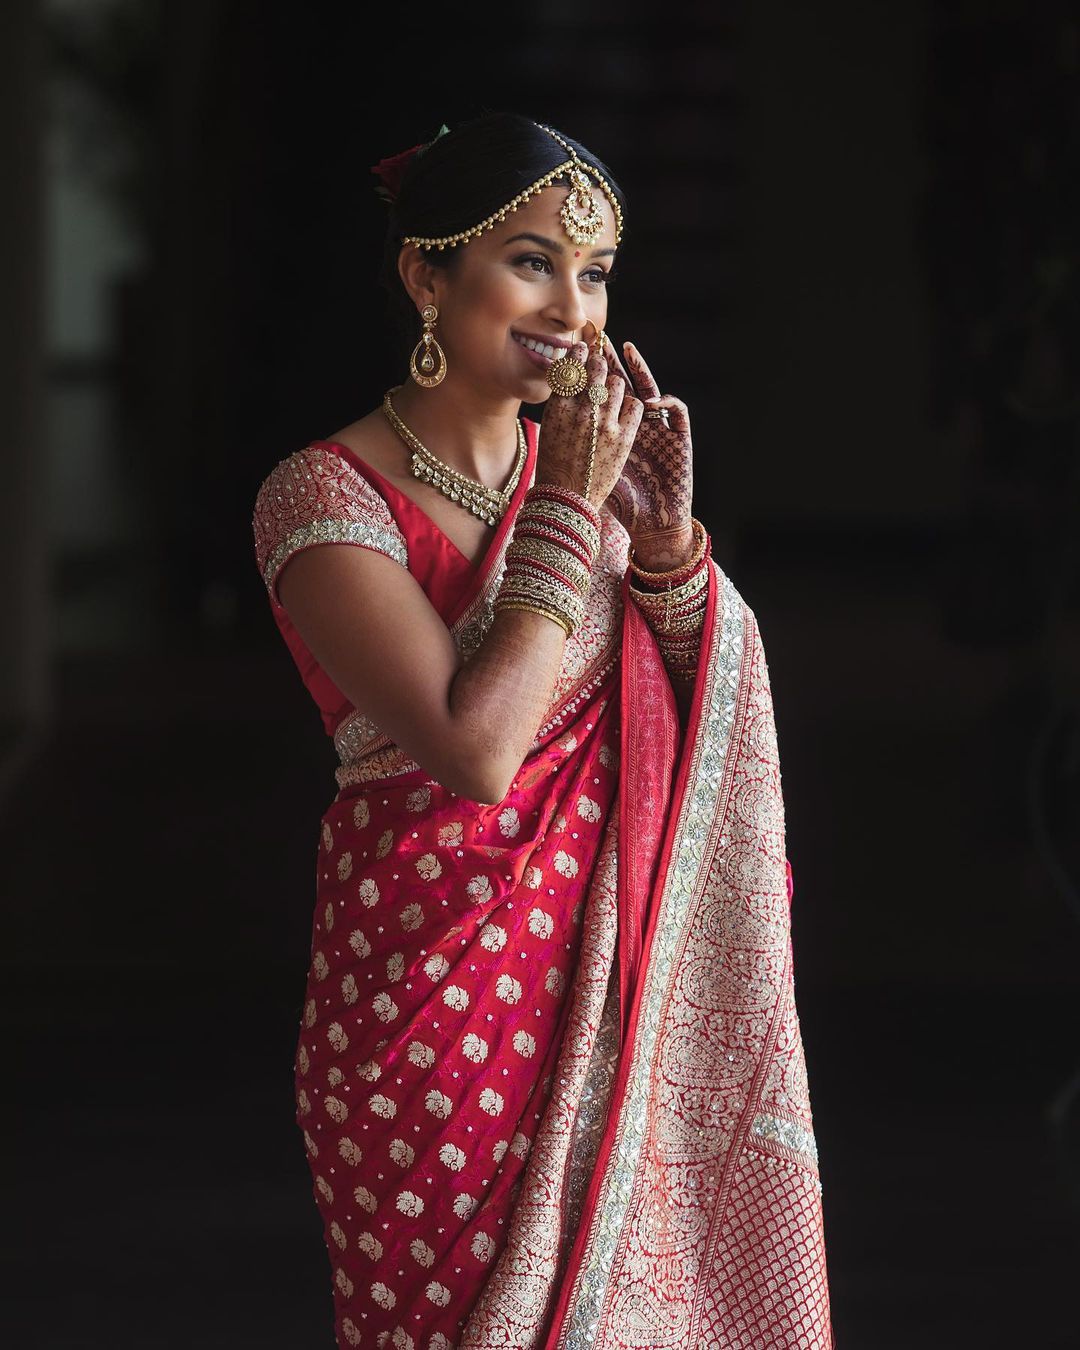 Anita Dongre Bridal Red Saree Look Beautiful Bridal Saree Look Spotted On Celebrities And Real Brides